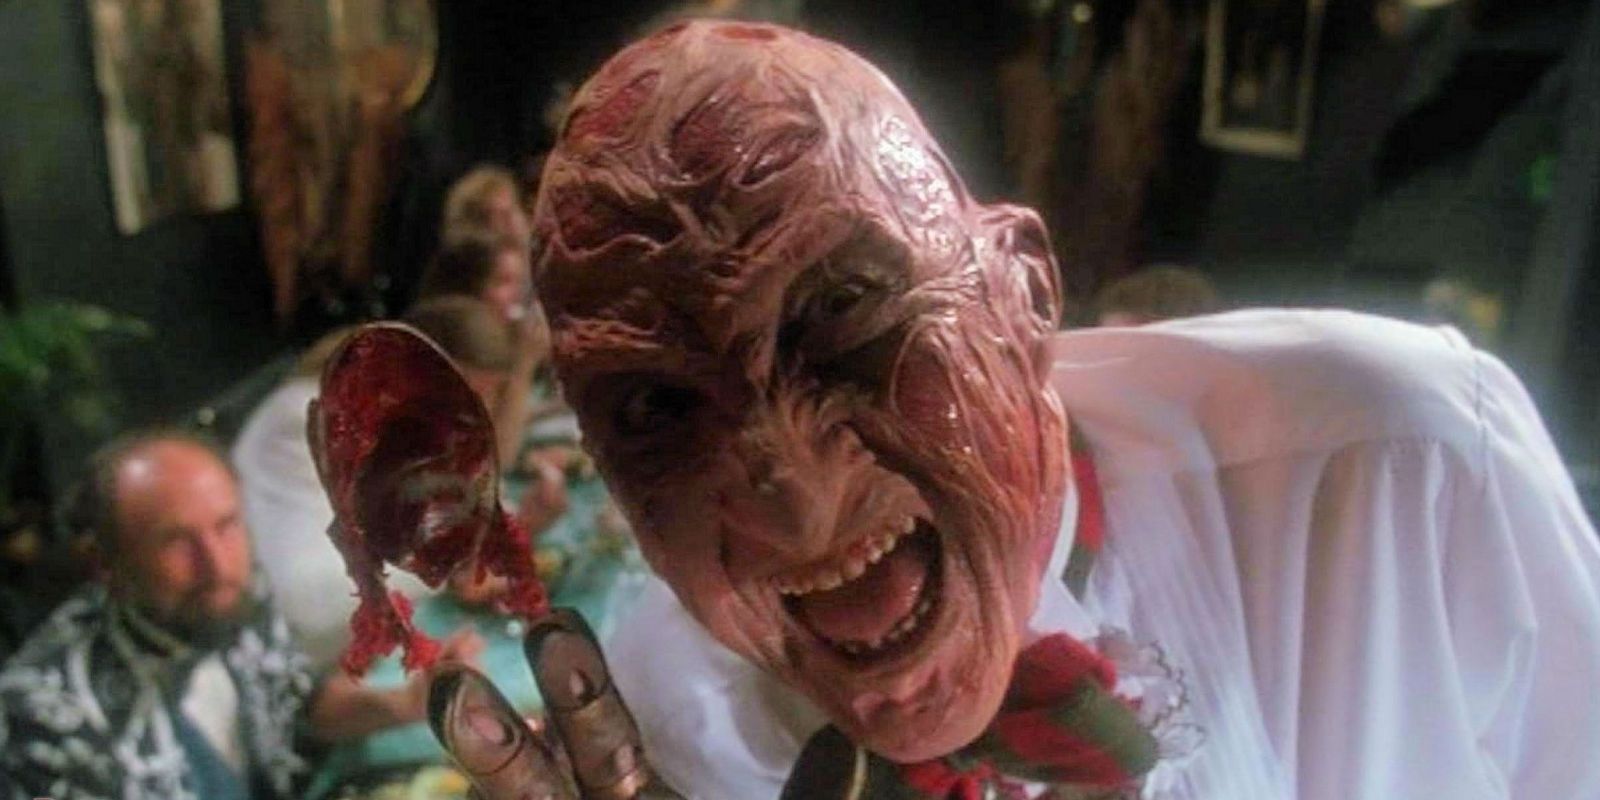 Freddy smiling at the camera in A Nightmare on Elm Street V: The Dream Child